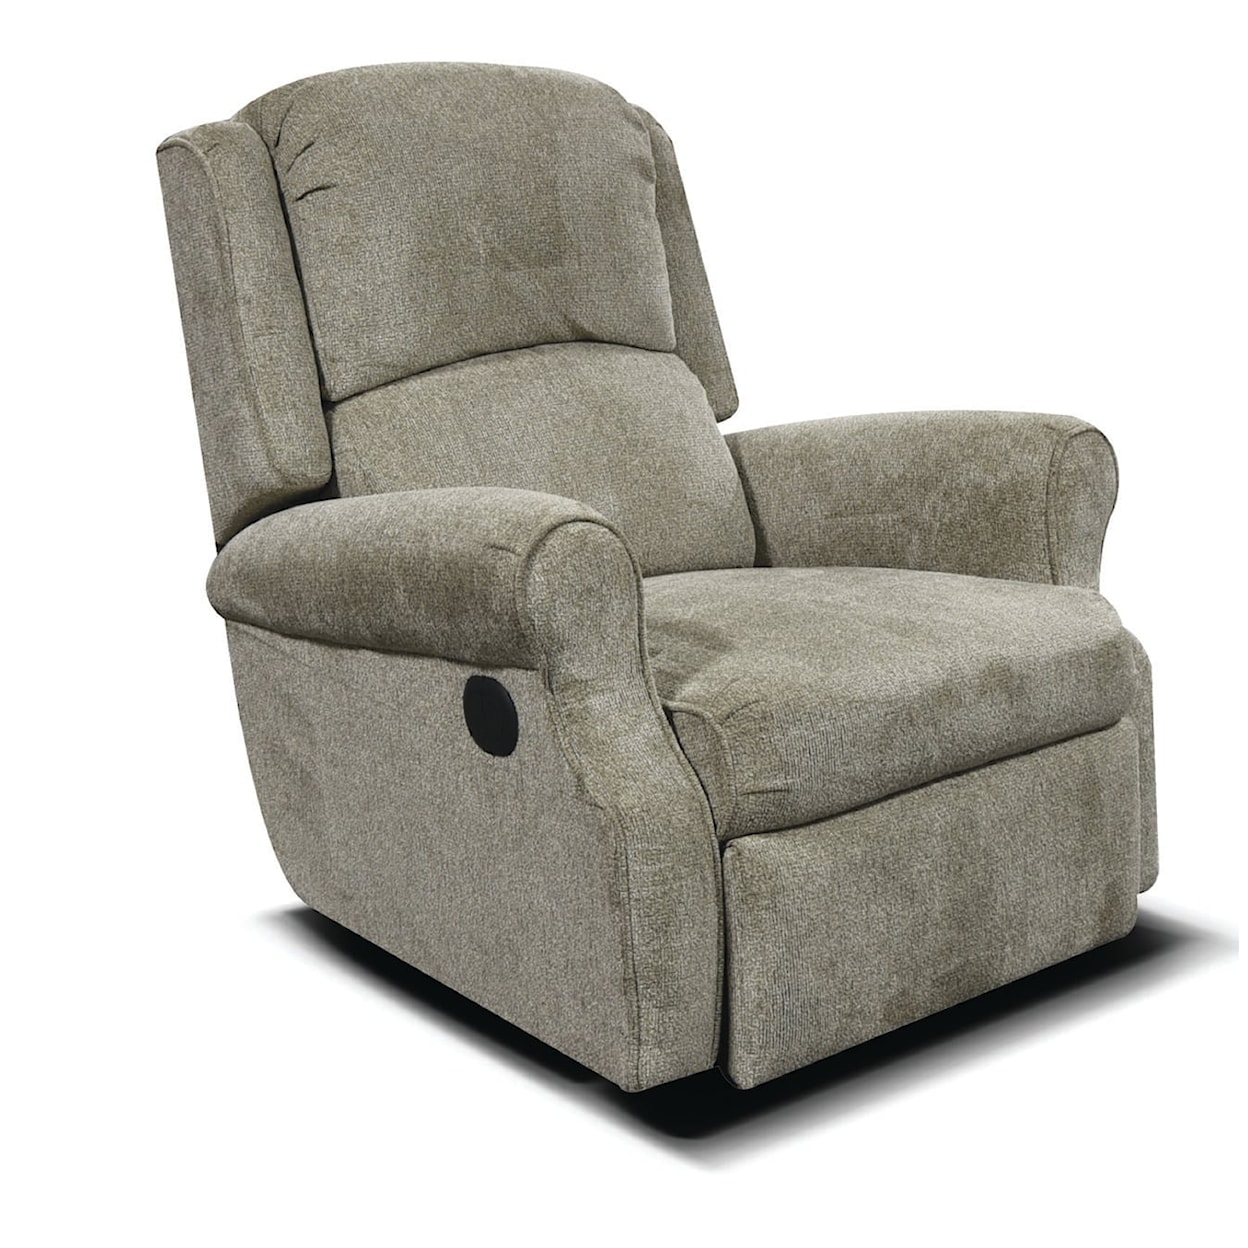 Tennessee Custom Upholstery 210 Series Power Reclining Lift Chair